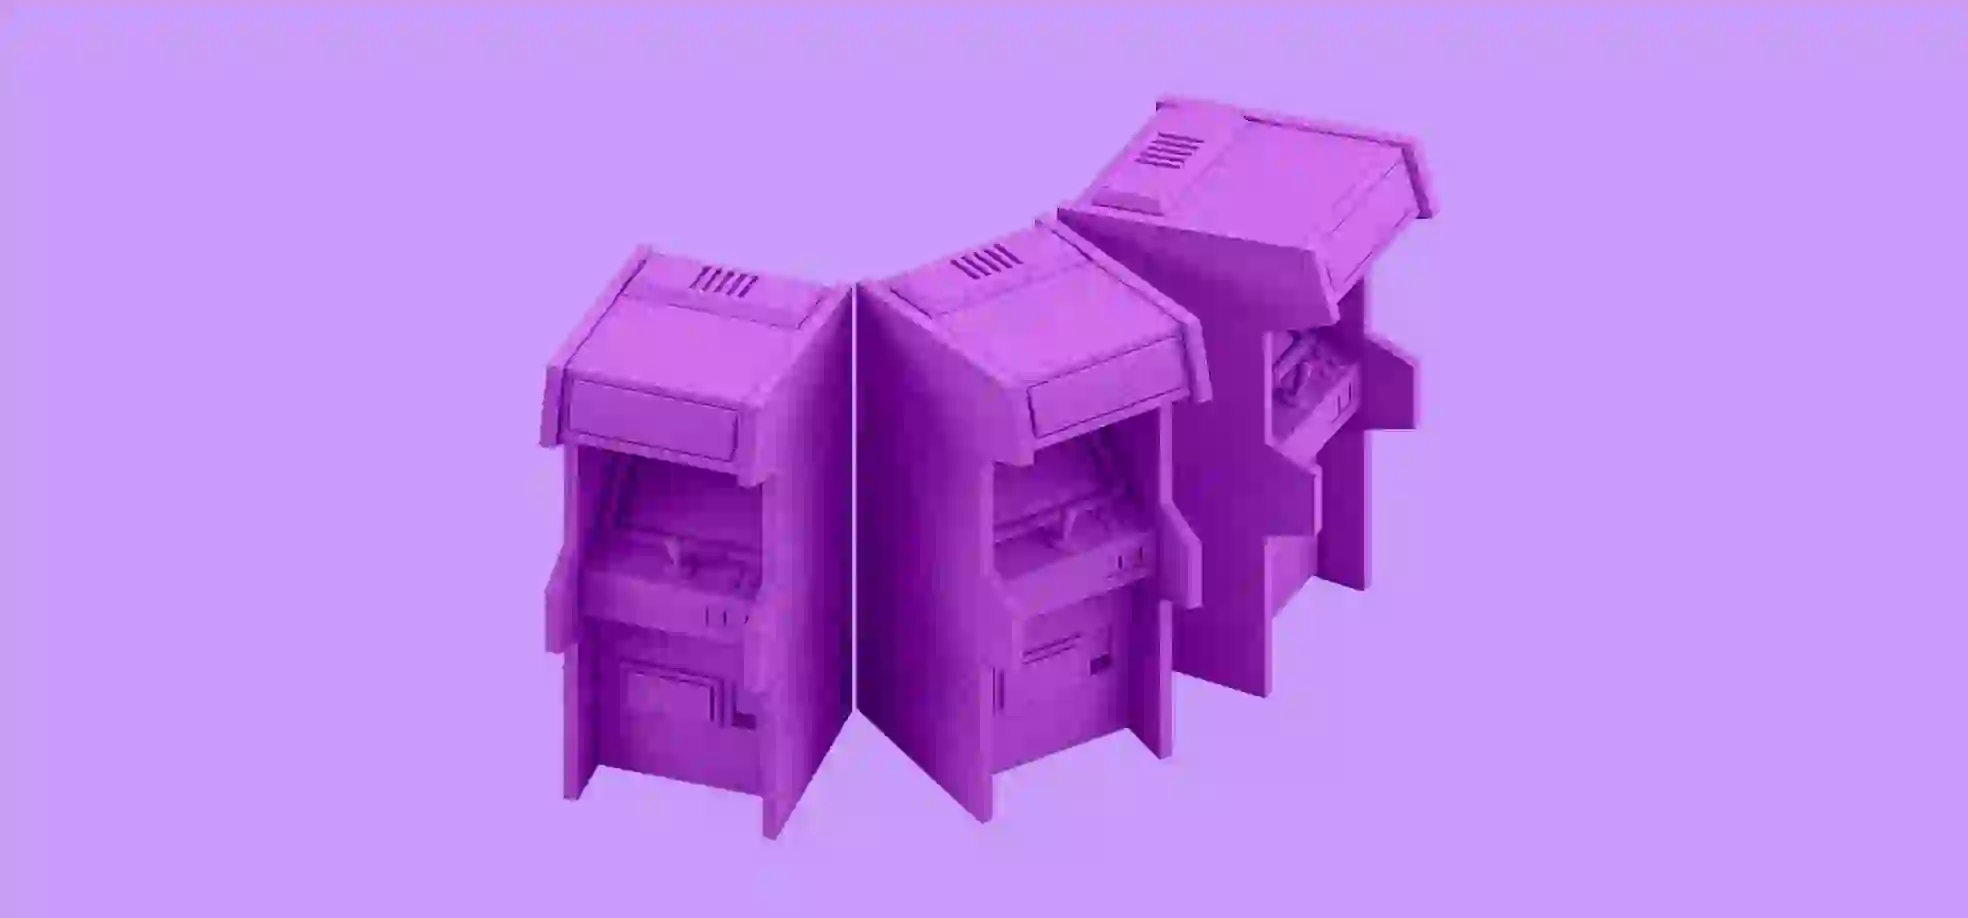 tree game machines illustration on a purple background